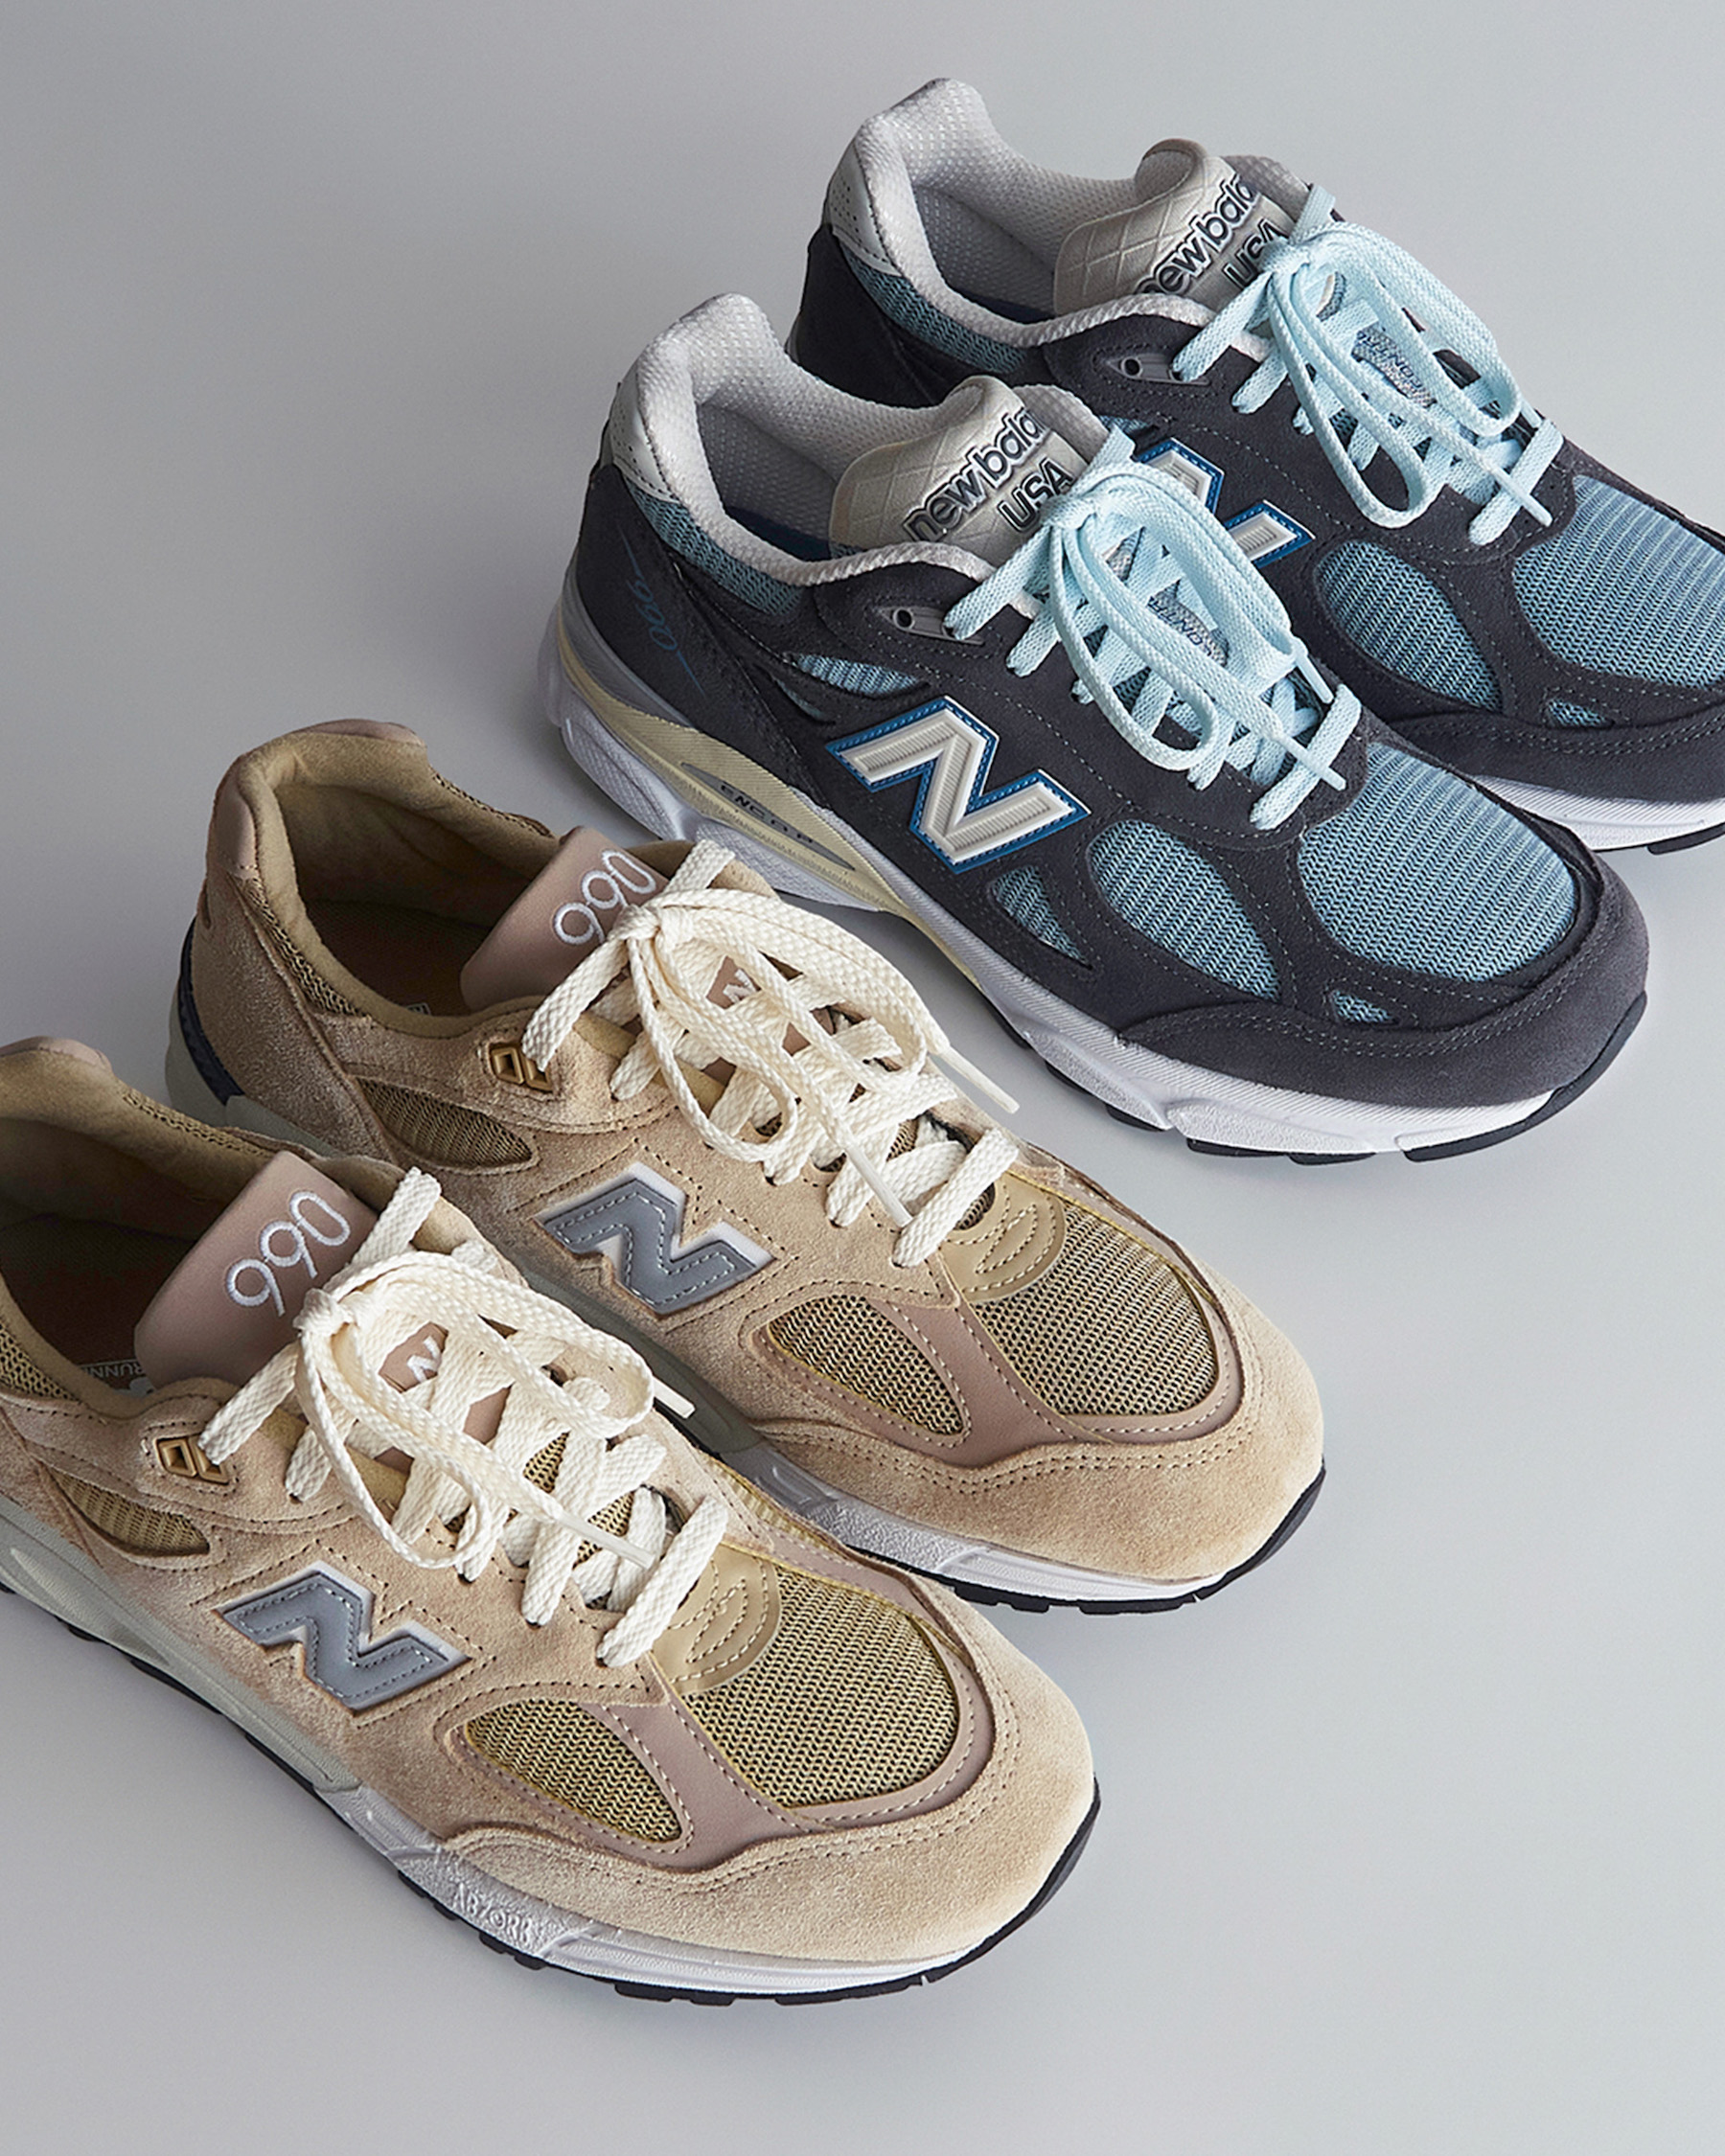 Kith New Balance 990 Fall 2022 Release Date